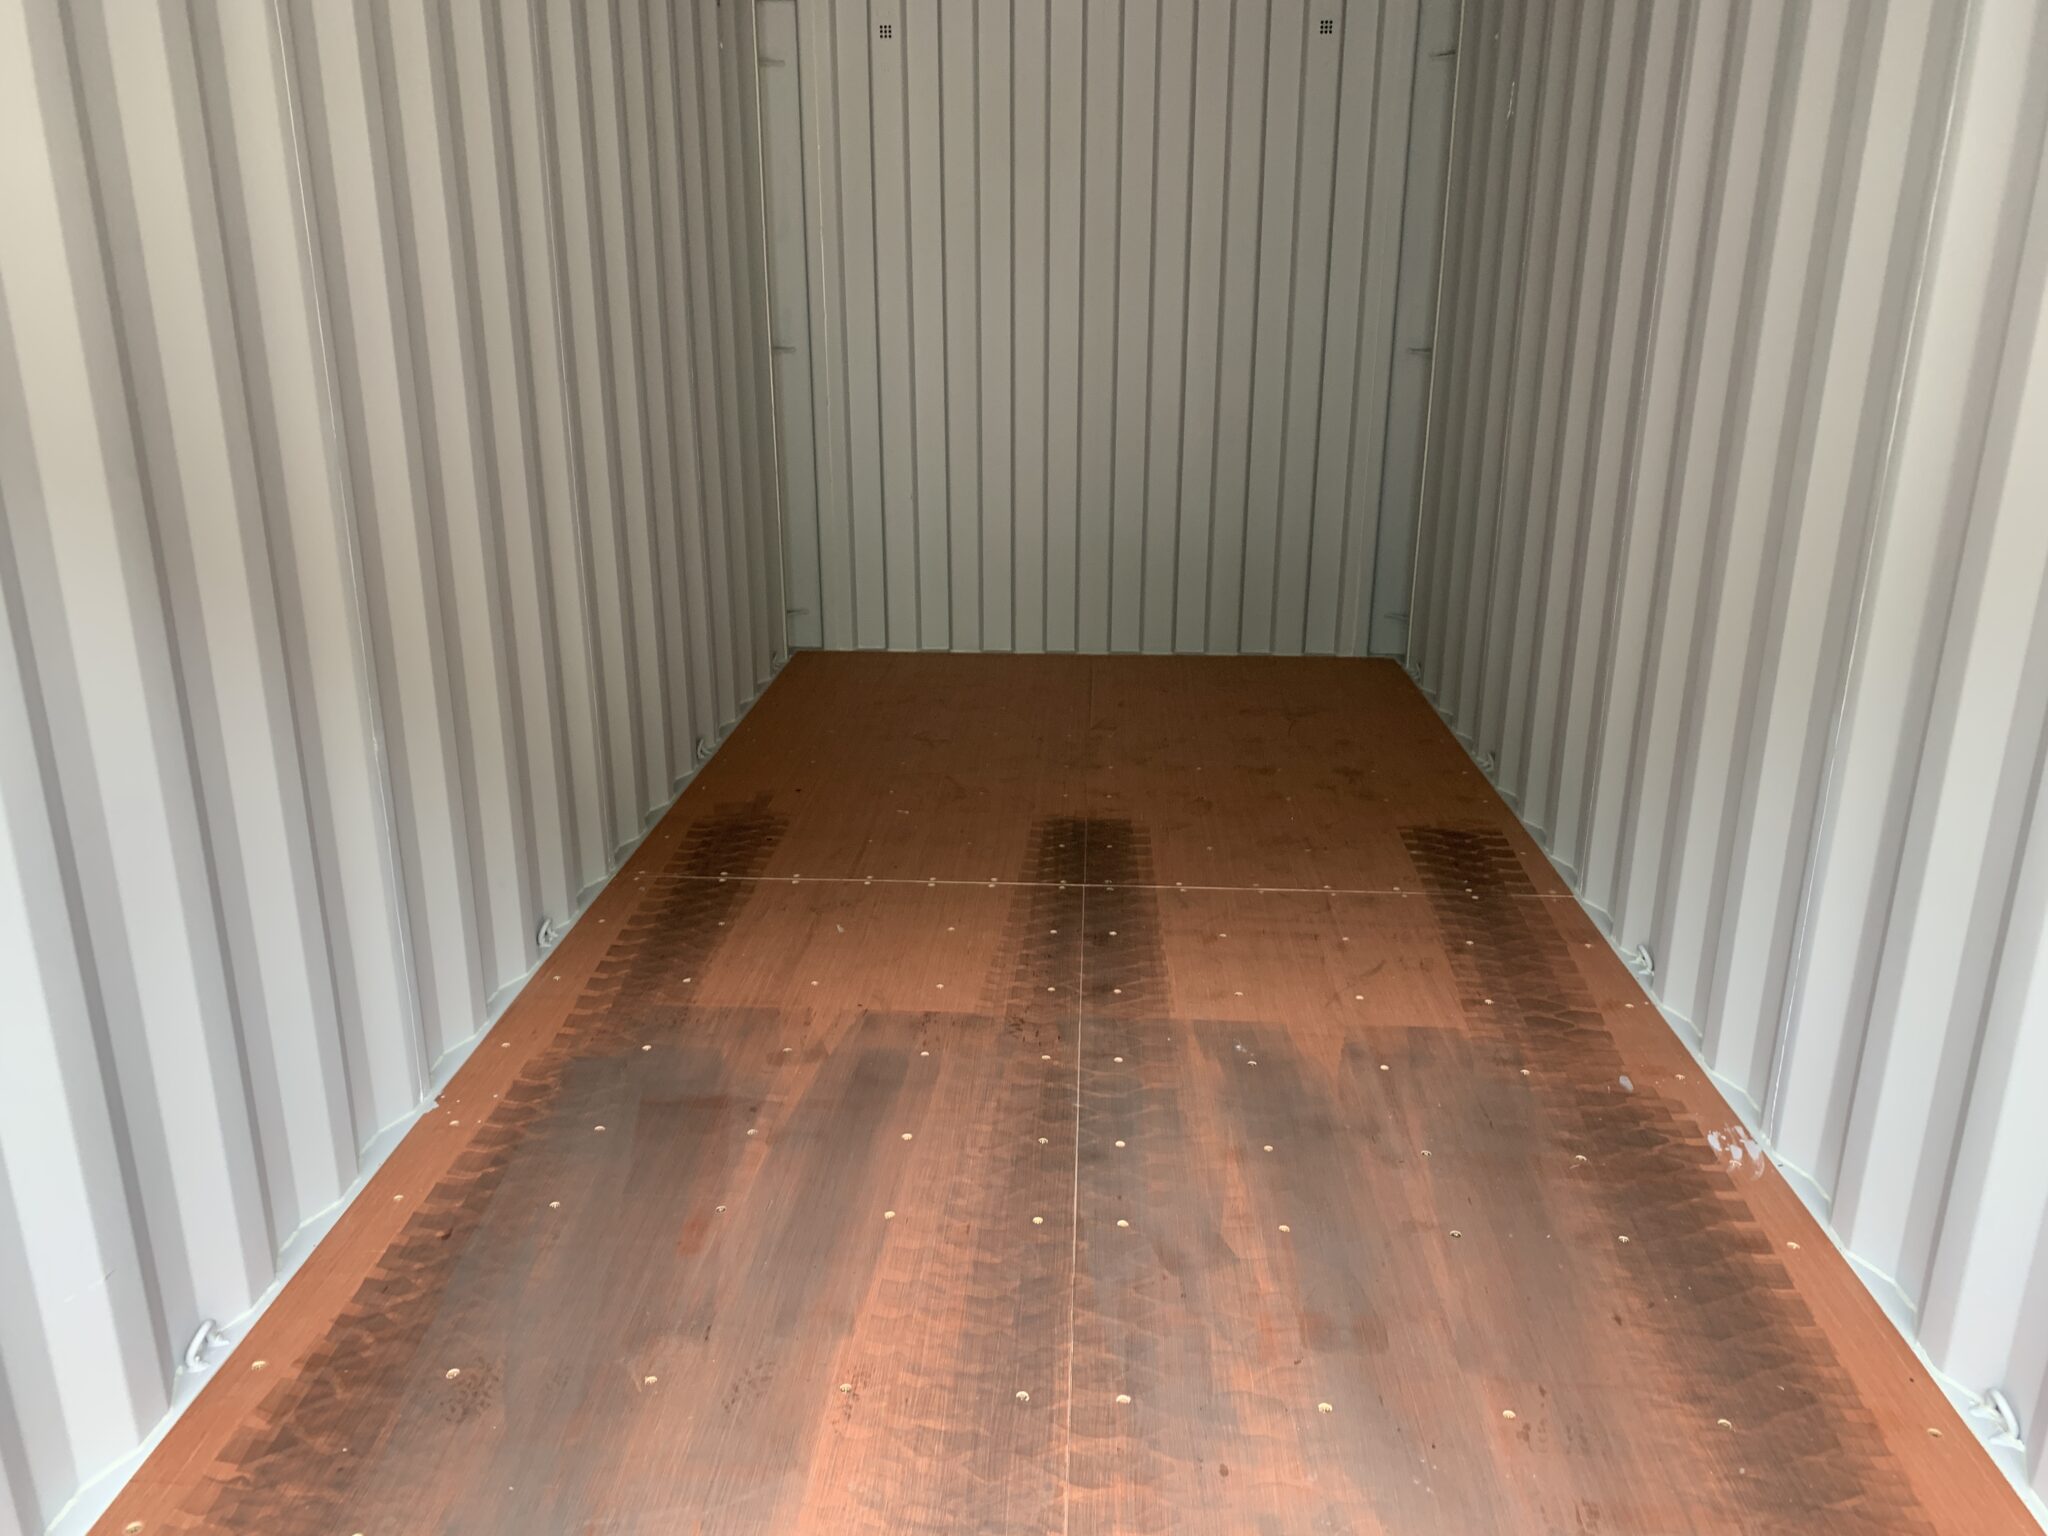 10′ x 8′ x 8.5′ Tall– New Shipping/Storage Container – Wind and Watertight  – BLUE